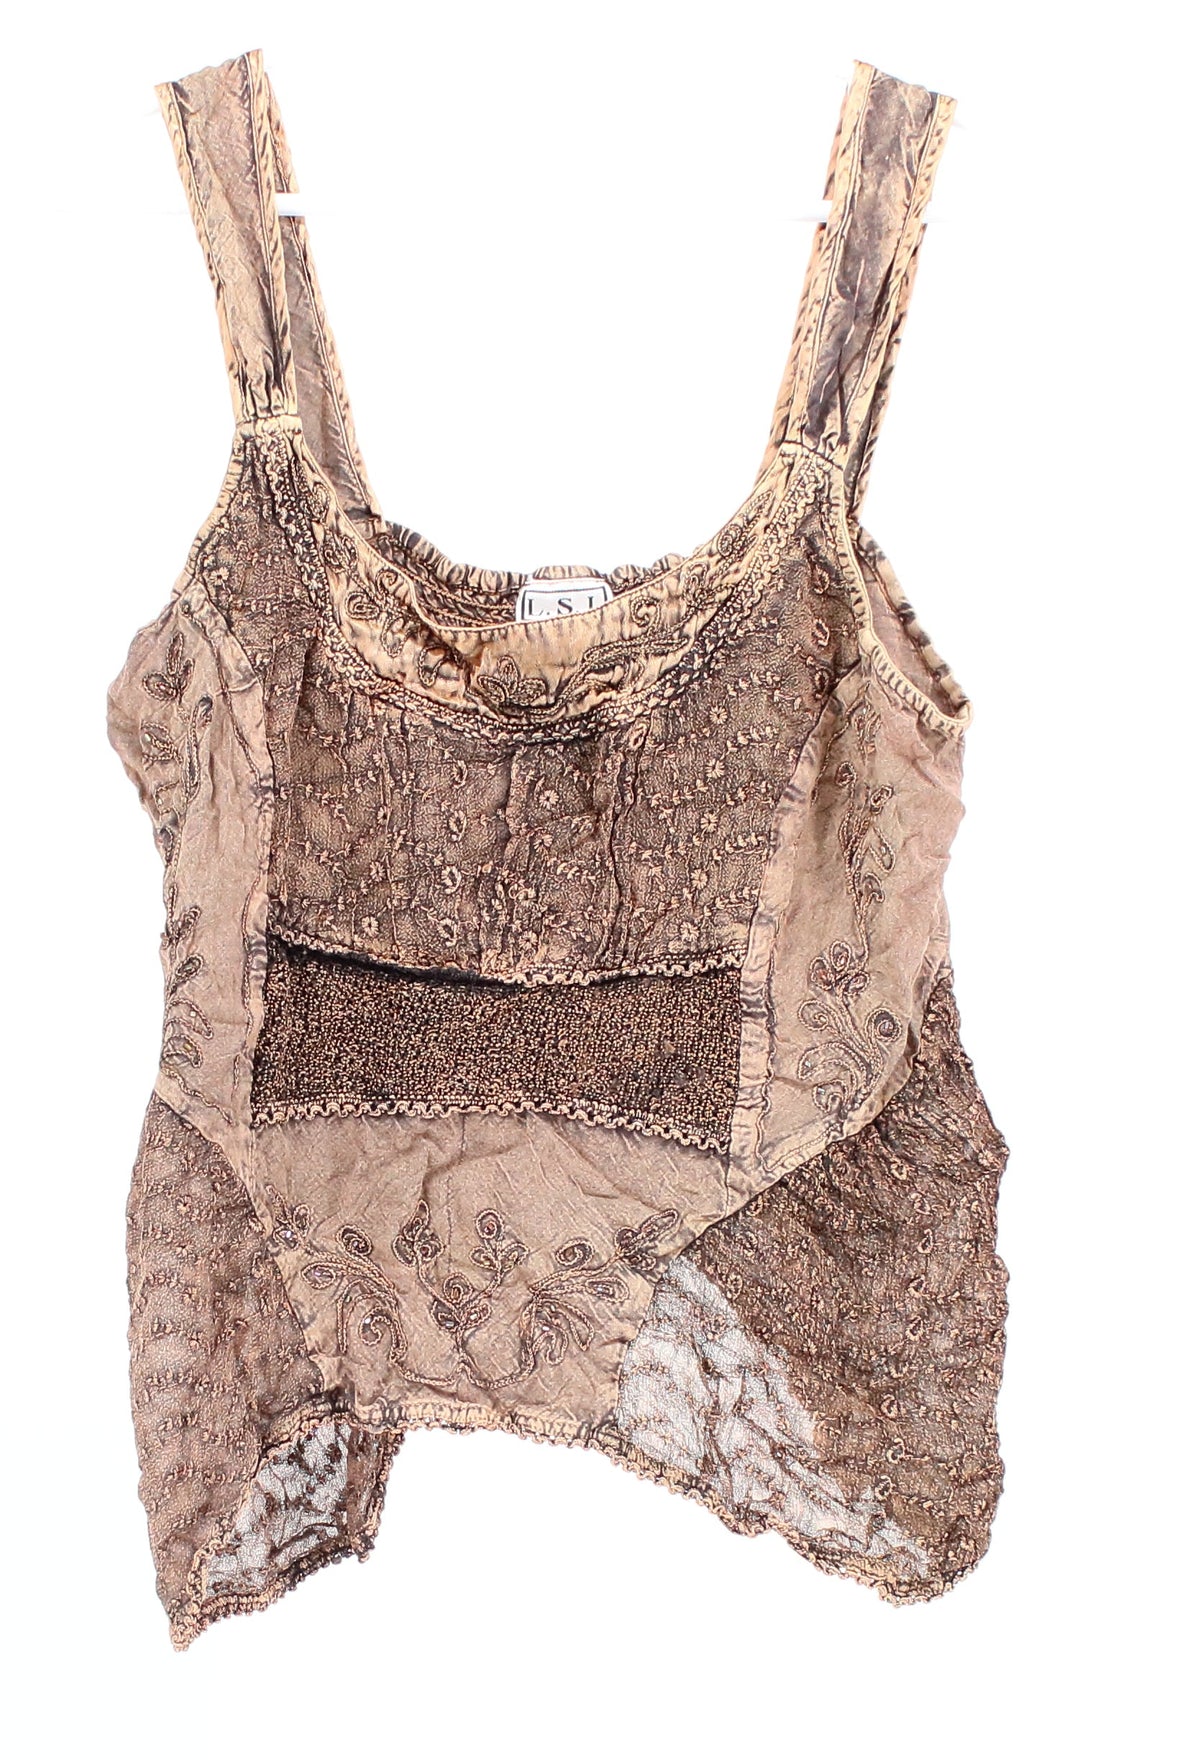 LSI Brown and Black Embroidered Tank Top